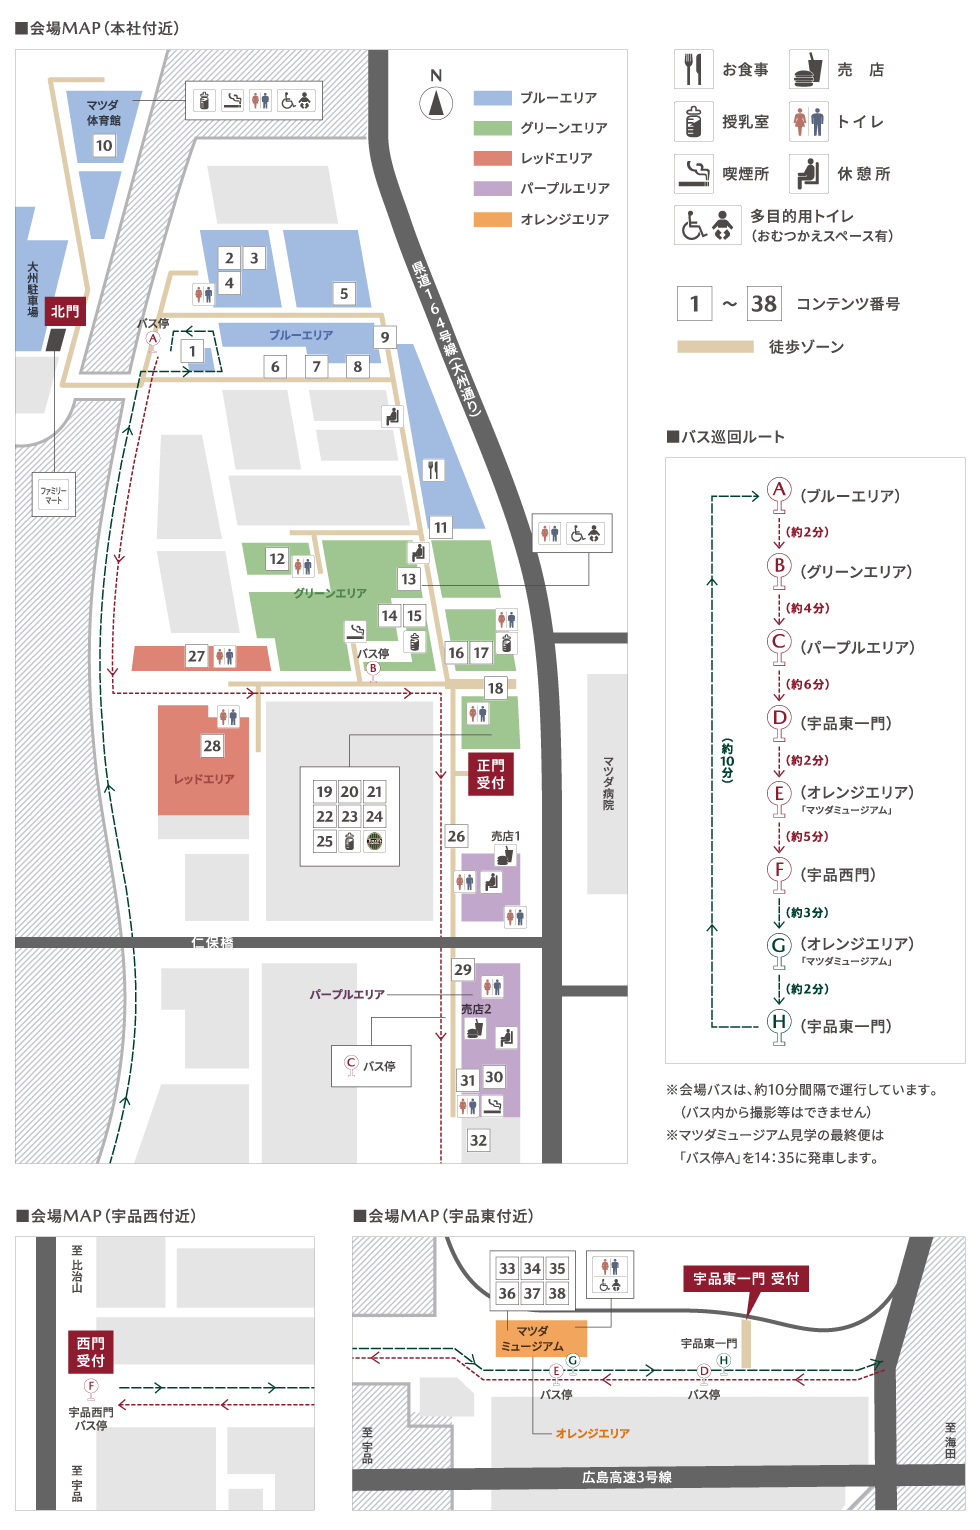 MAZDA OPEN DAY 2019 会場MAP